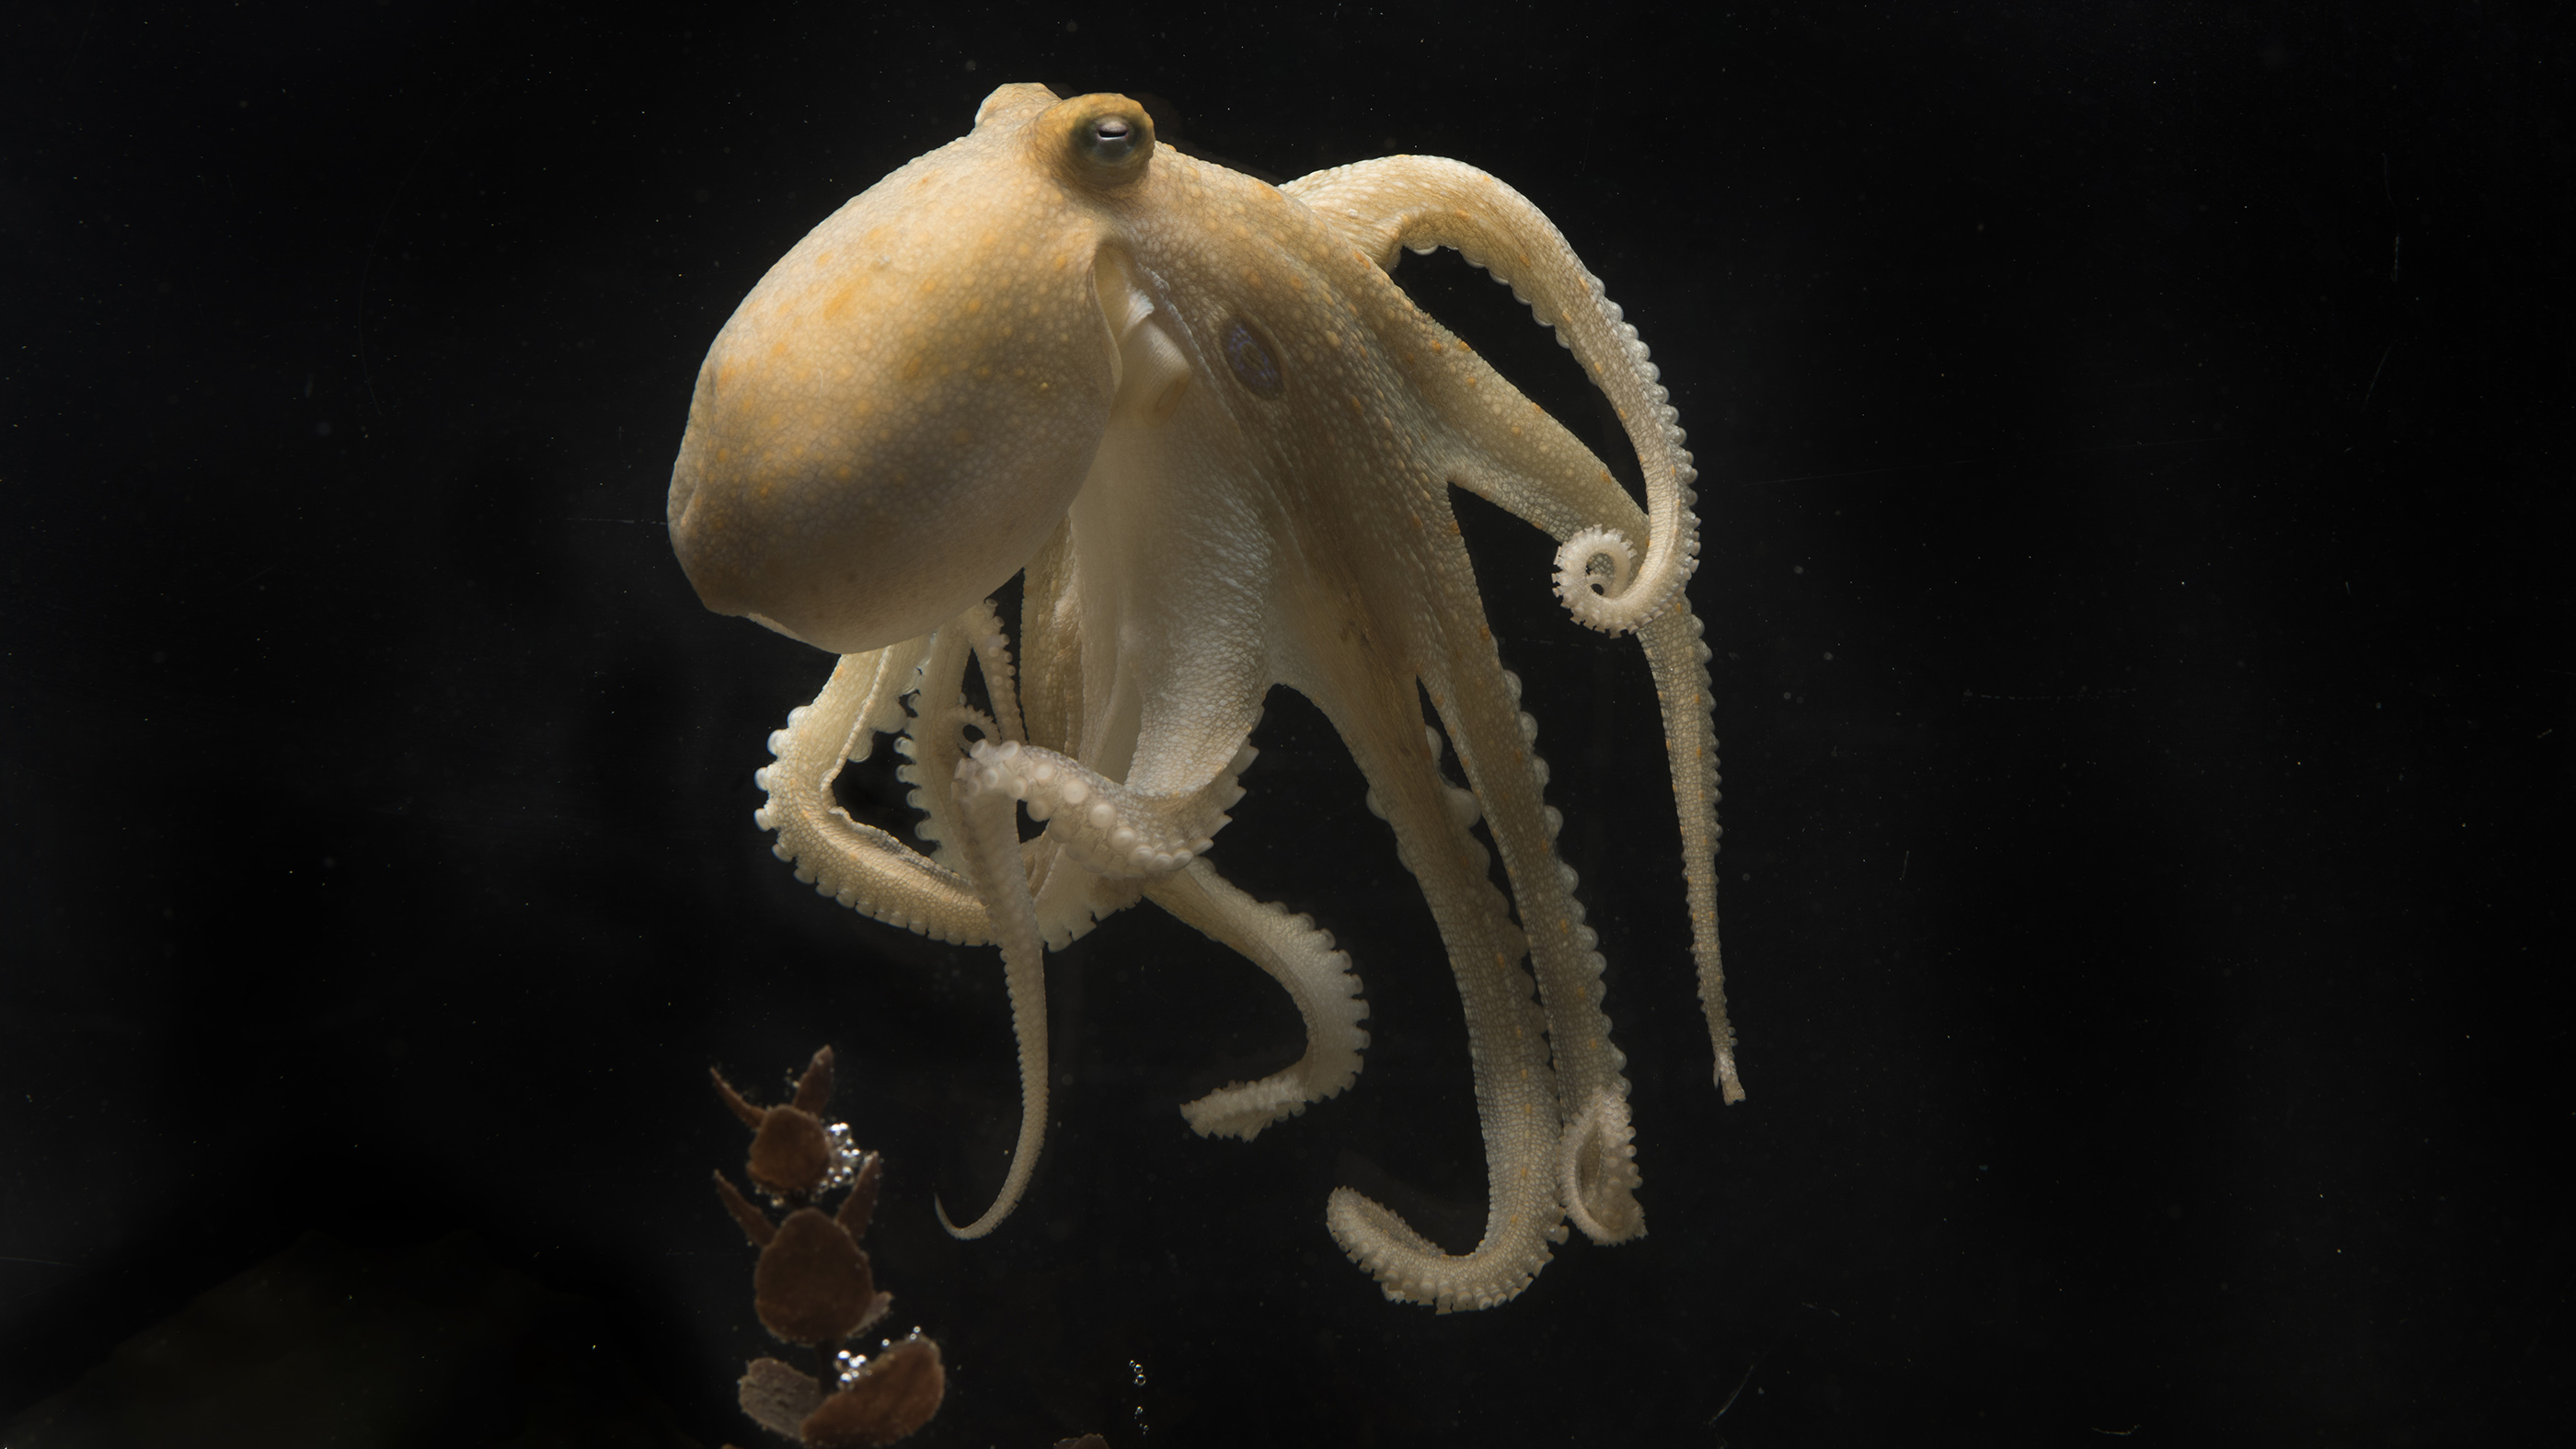 The California two-spot octopus (Octopus bimaculoides) has a circular blue eyespot on both sides of its head.